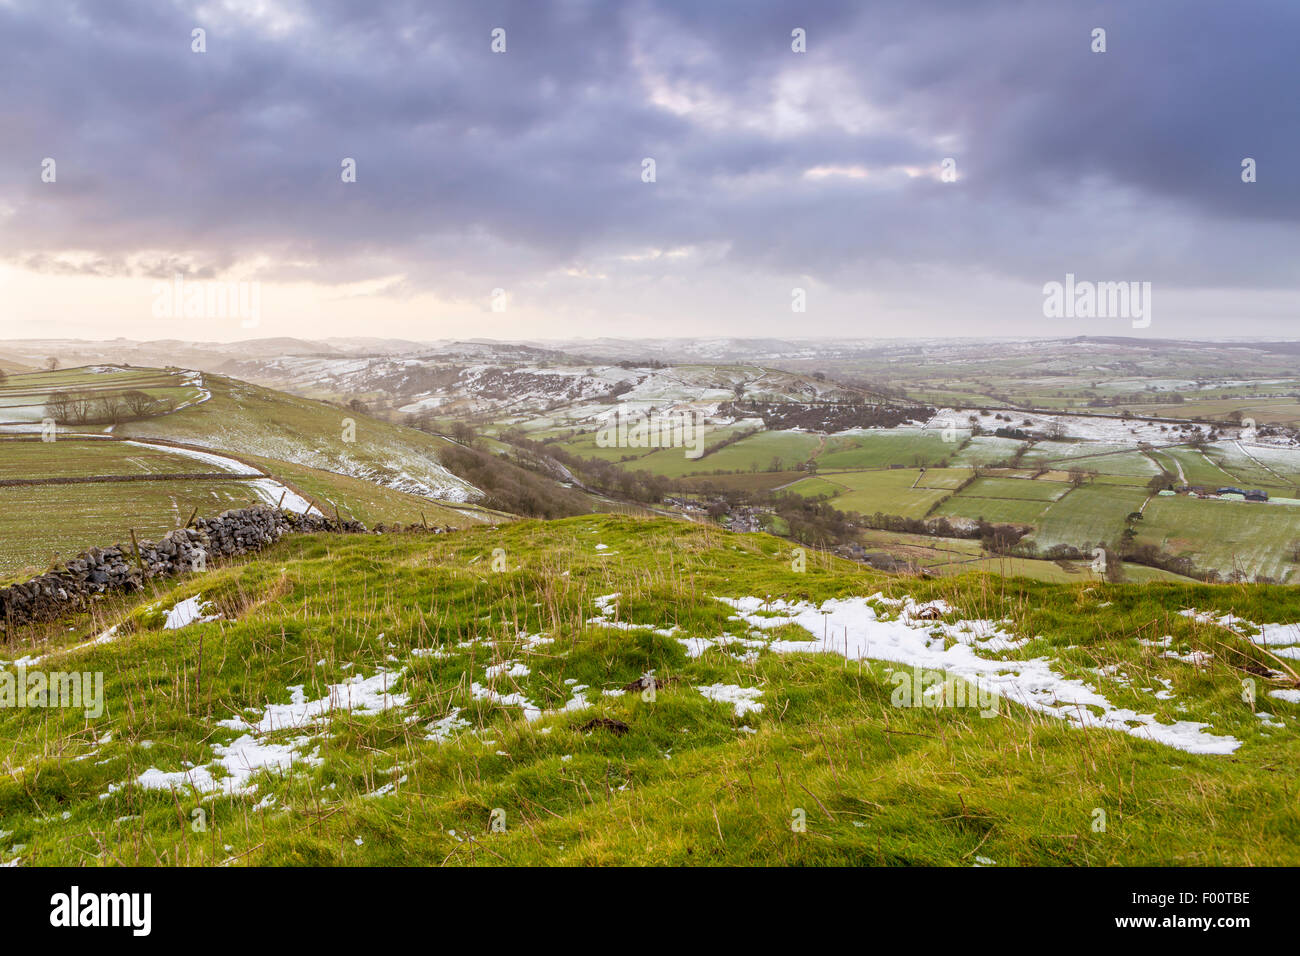 View from High Wheeldon towards Sheen Hill, Peak District National Park, Earl Sterndale, Derbyshire, England, United Kingdom, Stock Photo